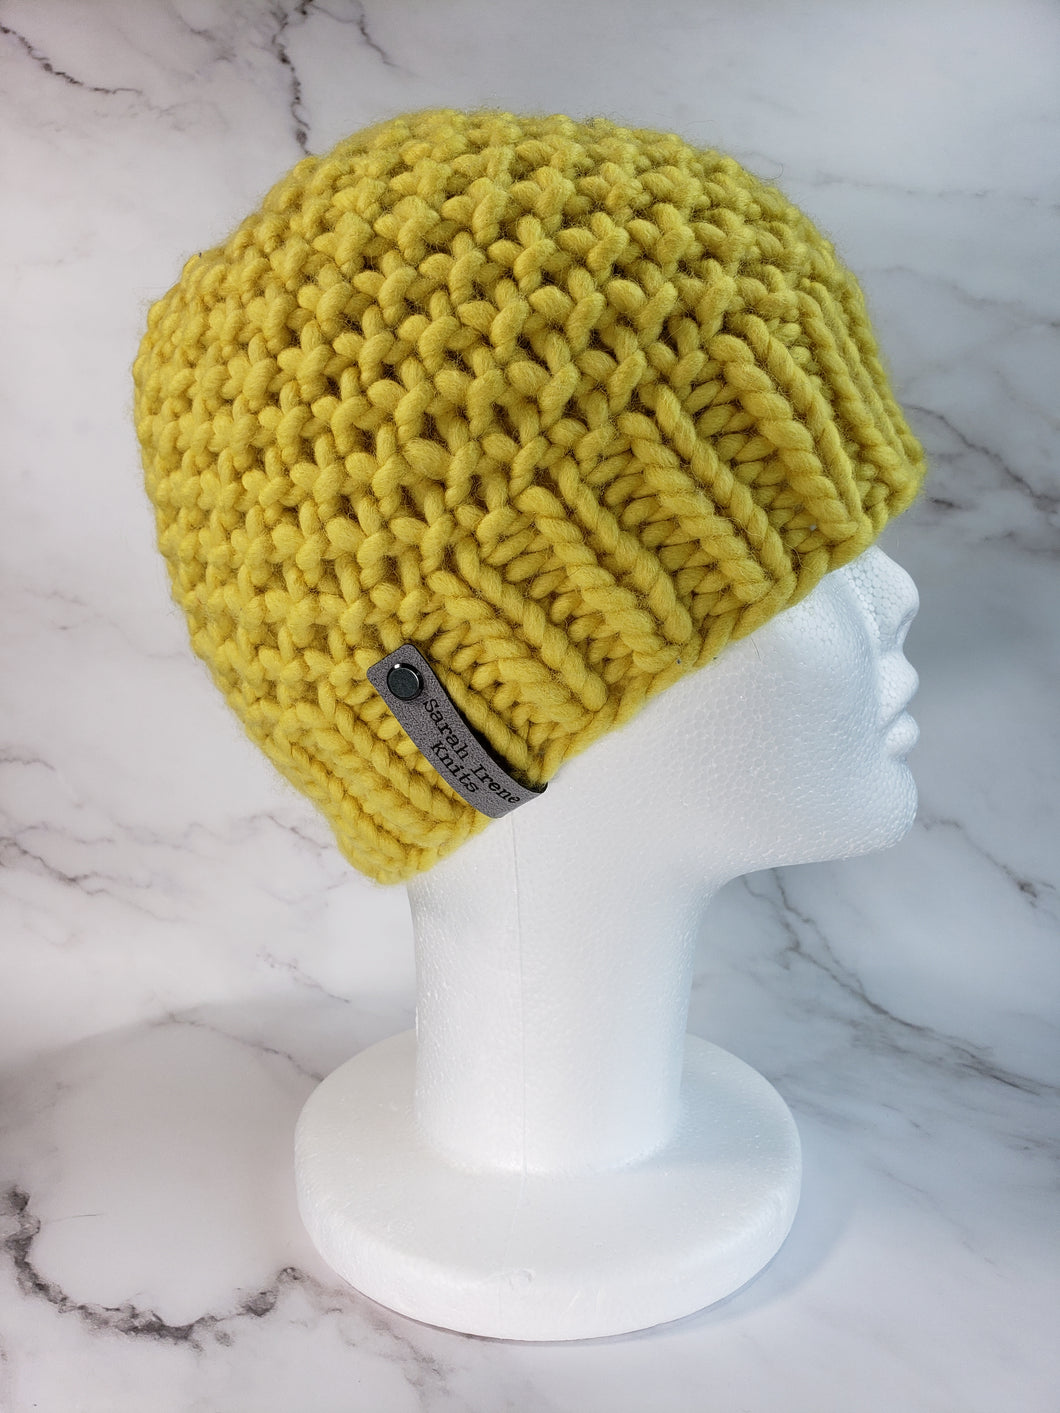 Textured beanie in yellow. No pom.